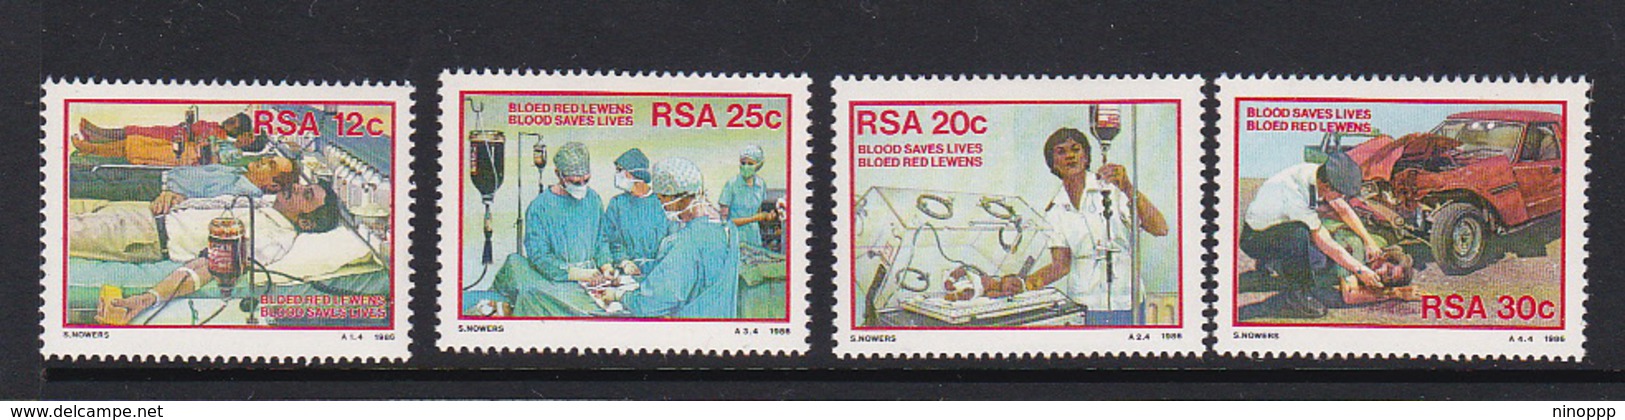 South Africa 1986 Blood Donors MNH Set - Cars